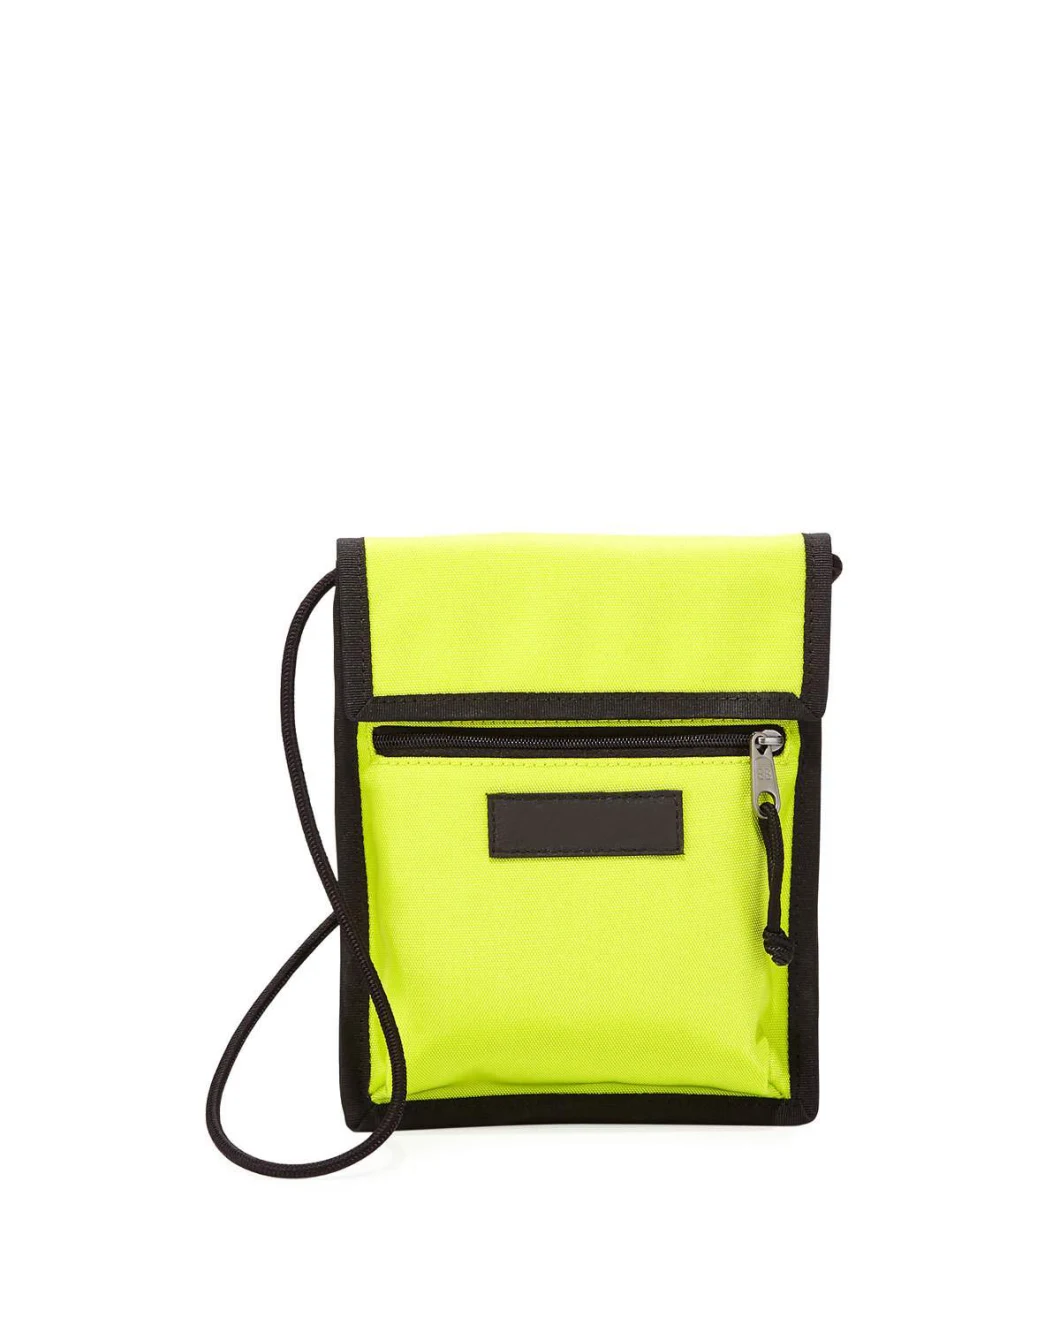 Candy Color  Nylon Waist Bag with Silver Hardware: